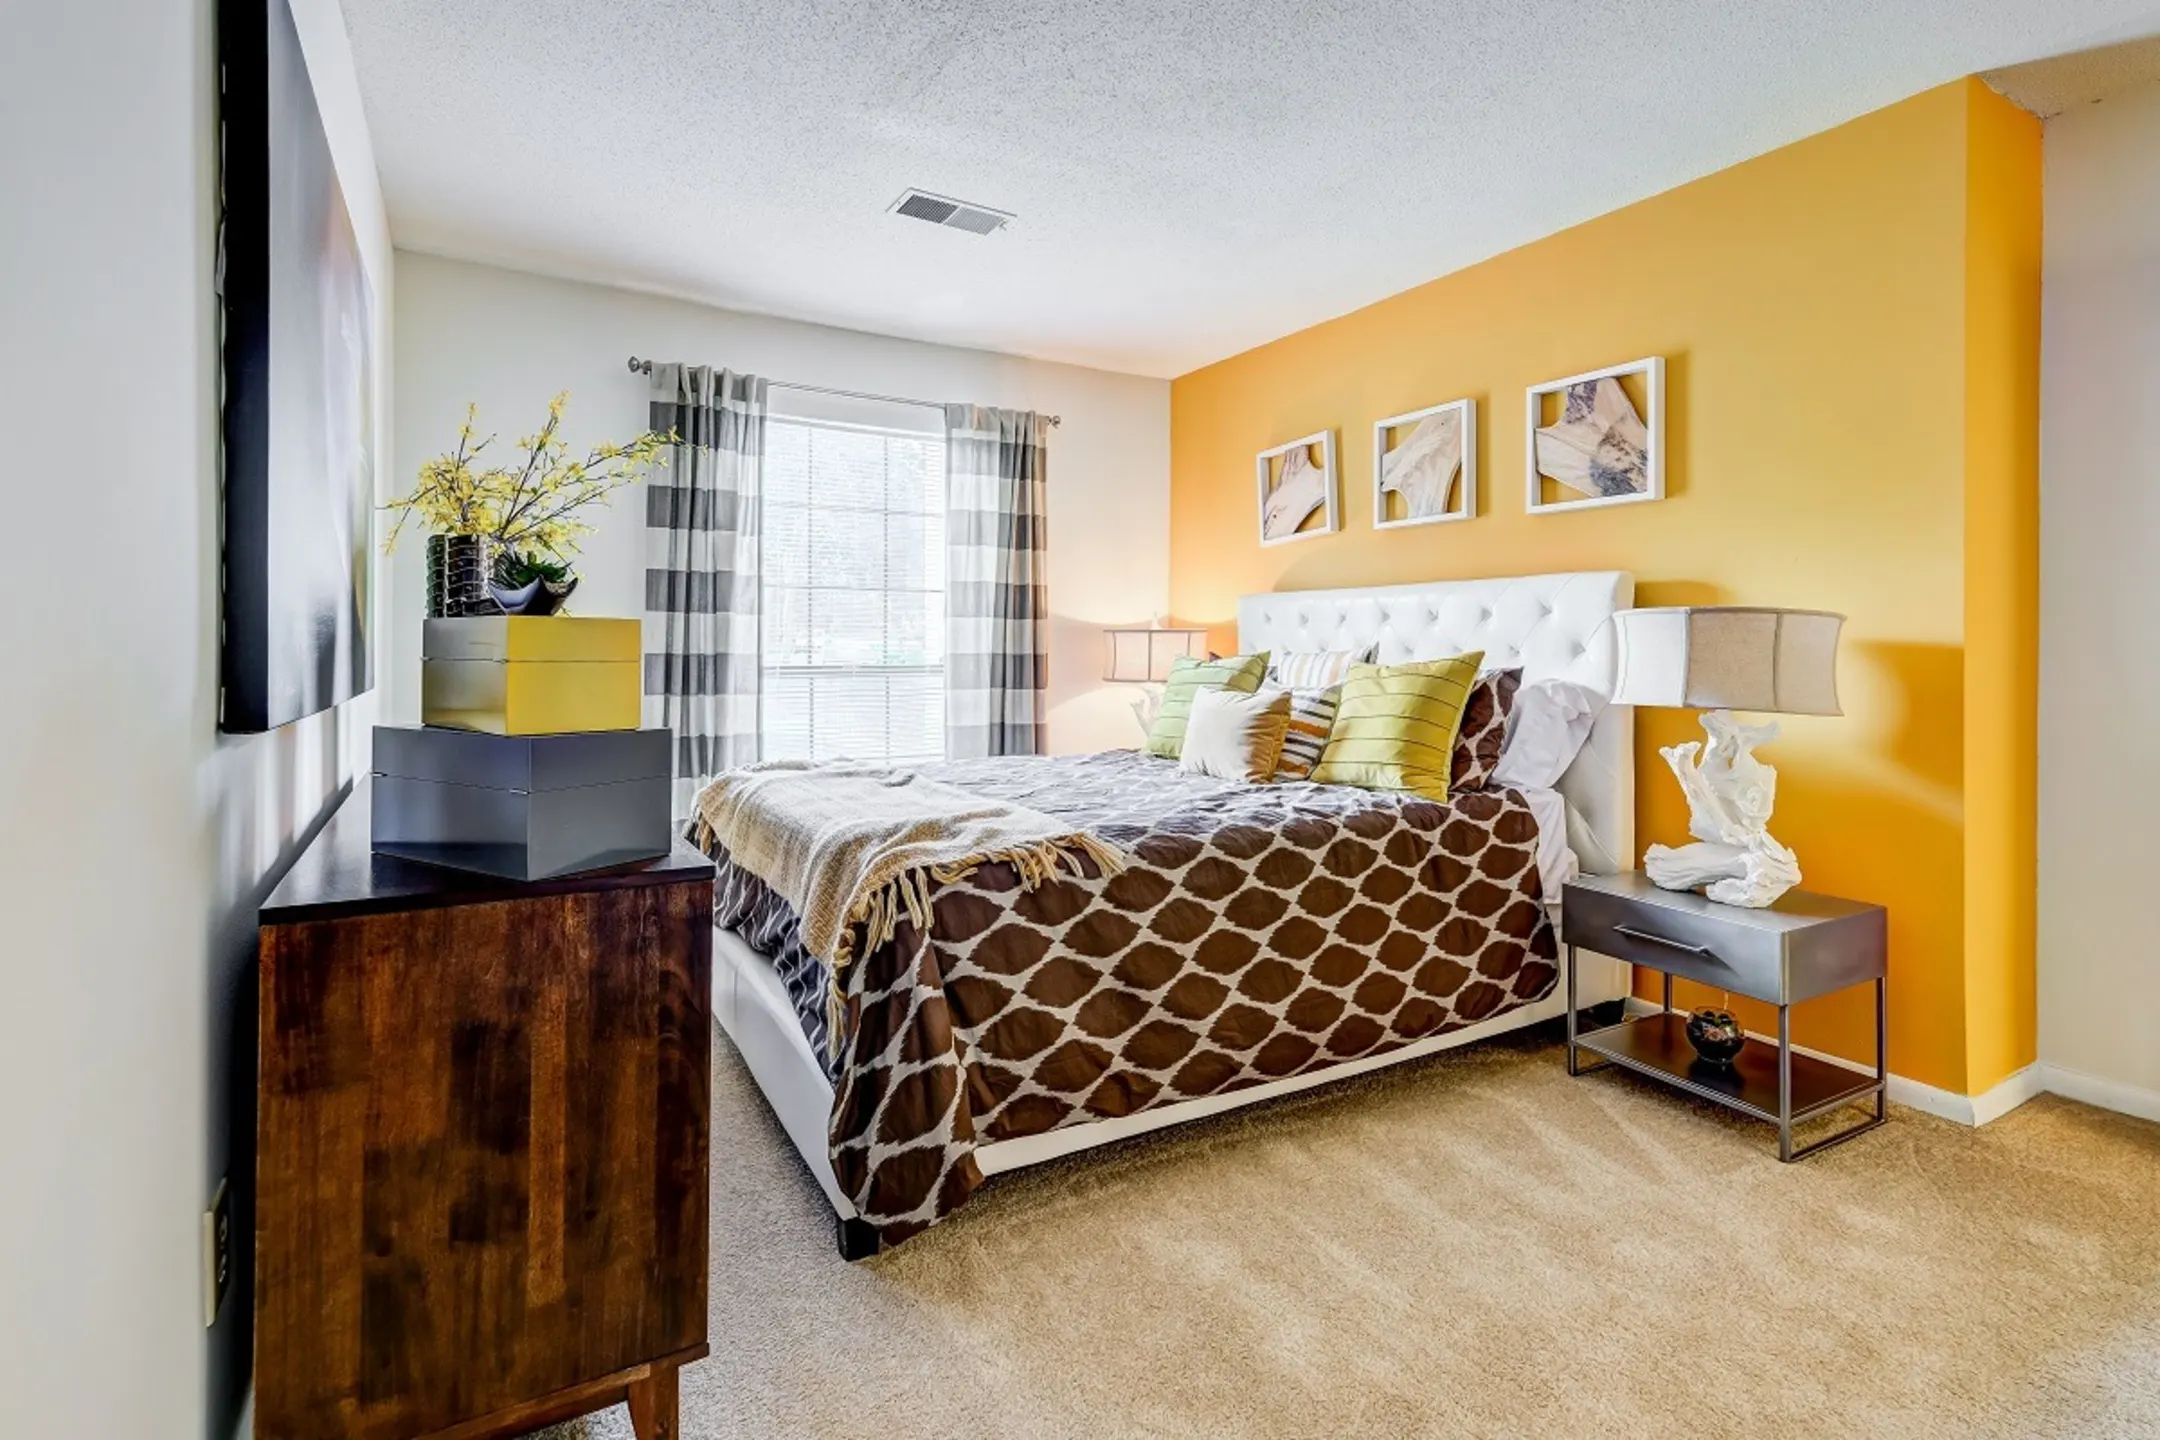 Bedroom - St. Andrews Apartments & Townhomes - Columbia, SC